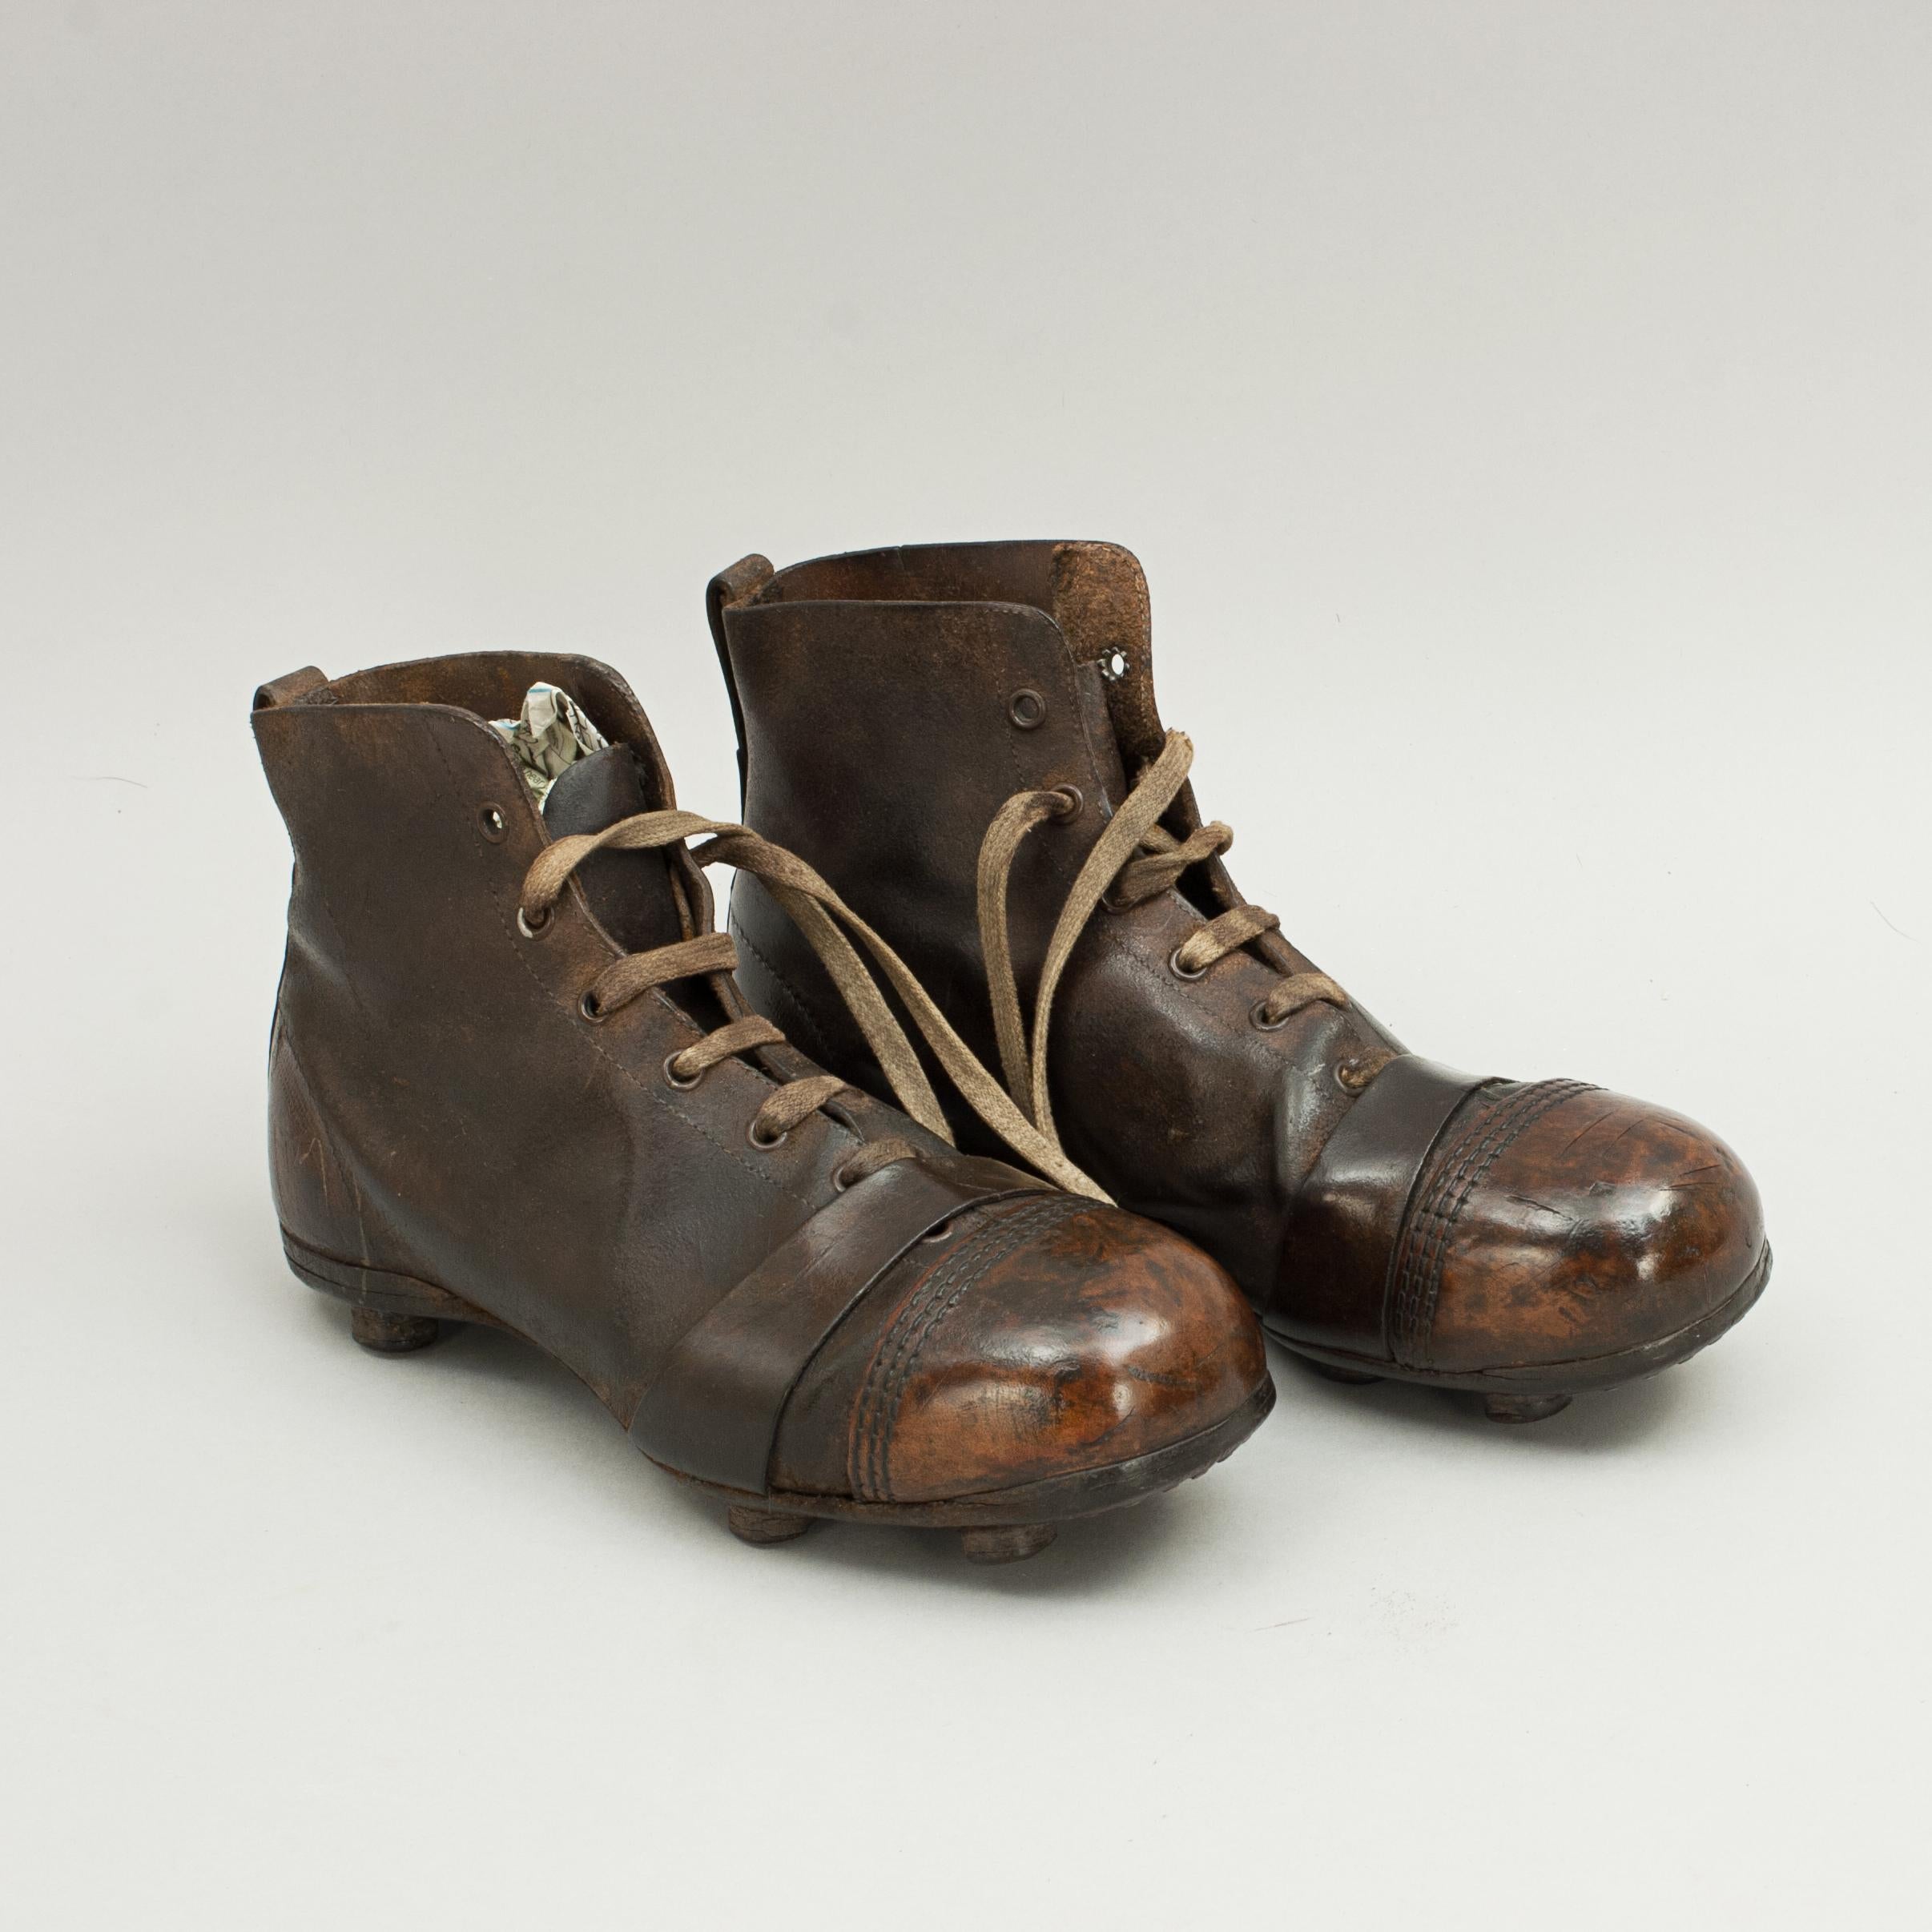 A pair of used high ankle leather football boots. The toe area on the boots are made of hardened leather with an extra leather strap behind. The sole of the boots are fitted with 6 leather studs, each stud is formed by layers of leather cylindrical